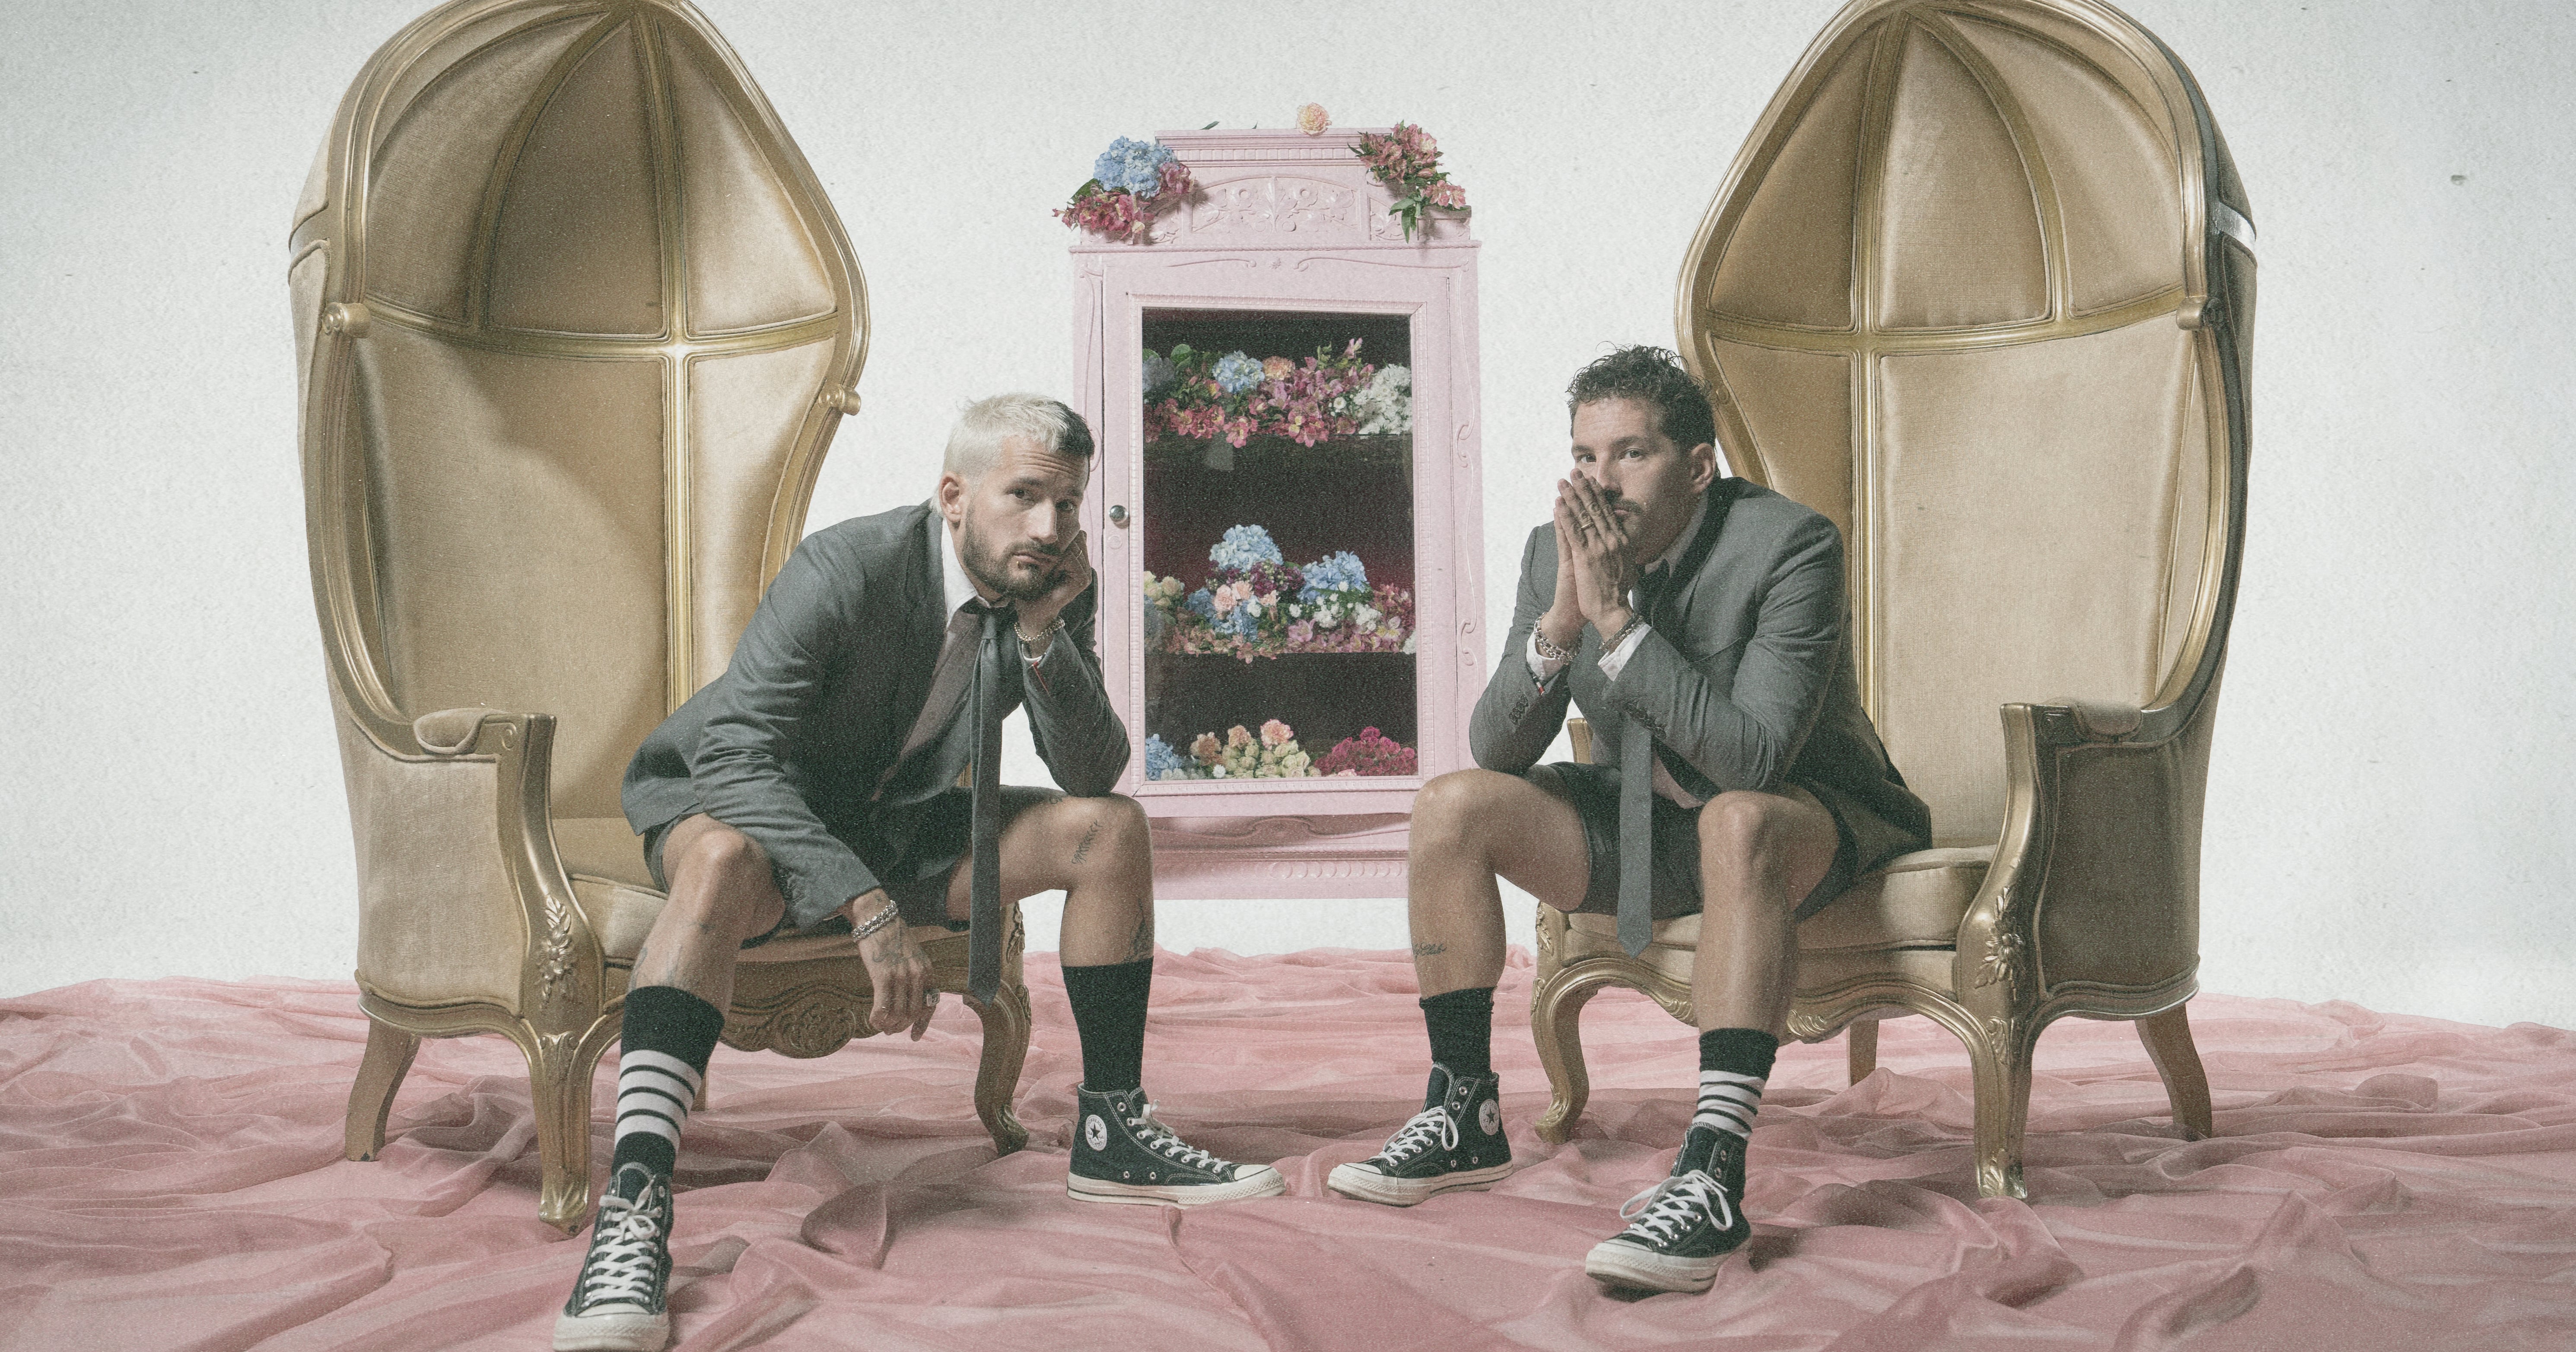 Mau y Ricky’s “Hotel Caracas” Album Is an Ode to Family